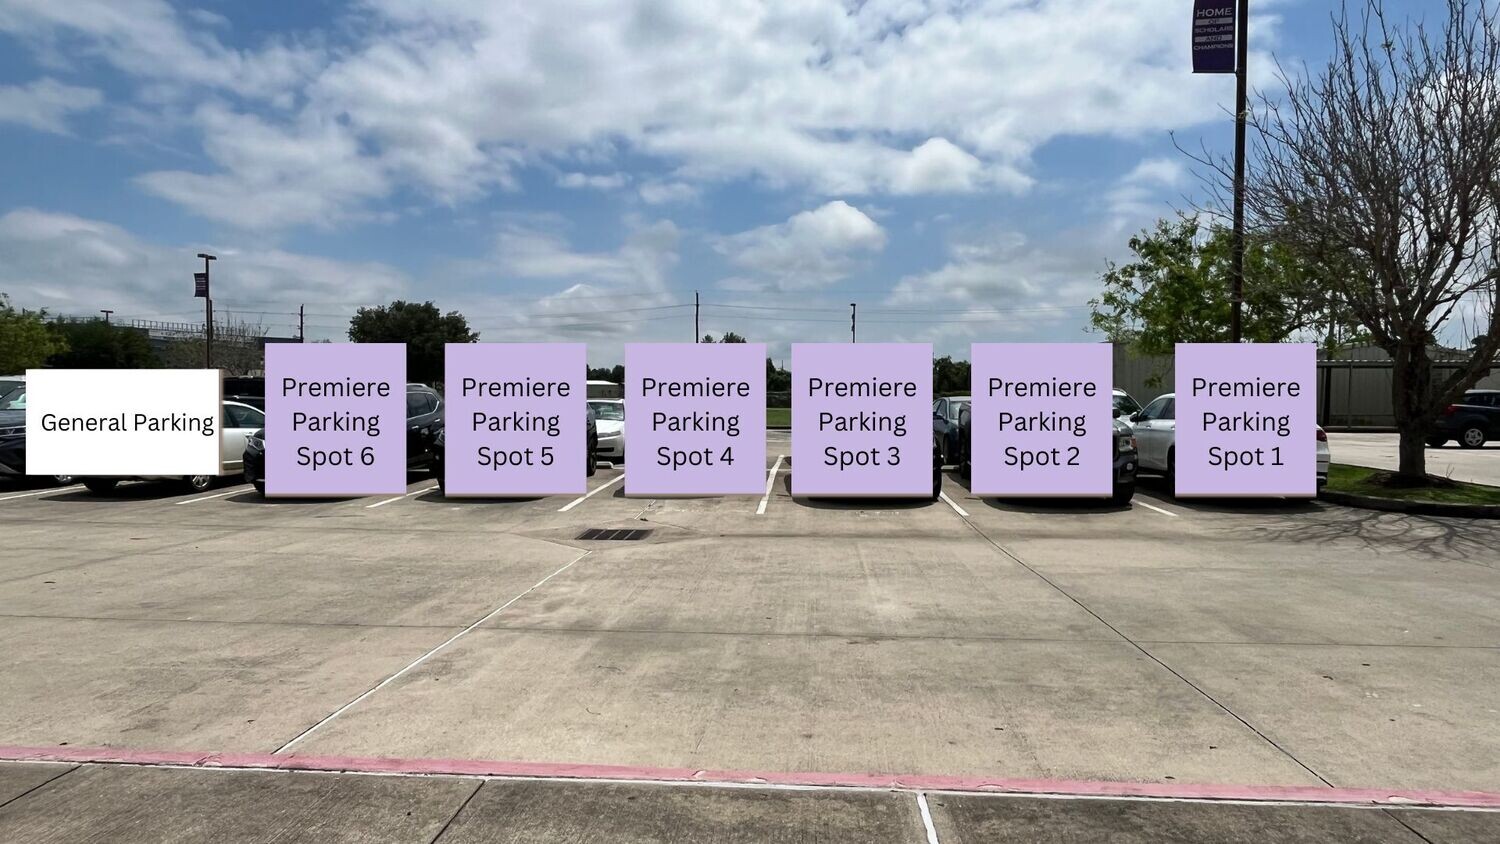 Spring Show Premiere Parking - Saturday, May 4th